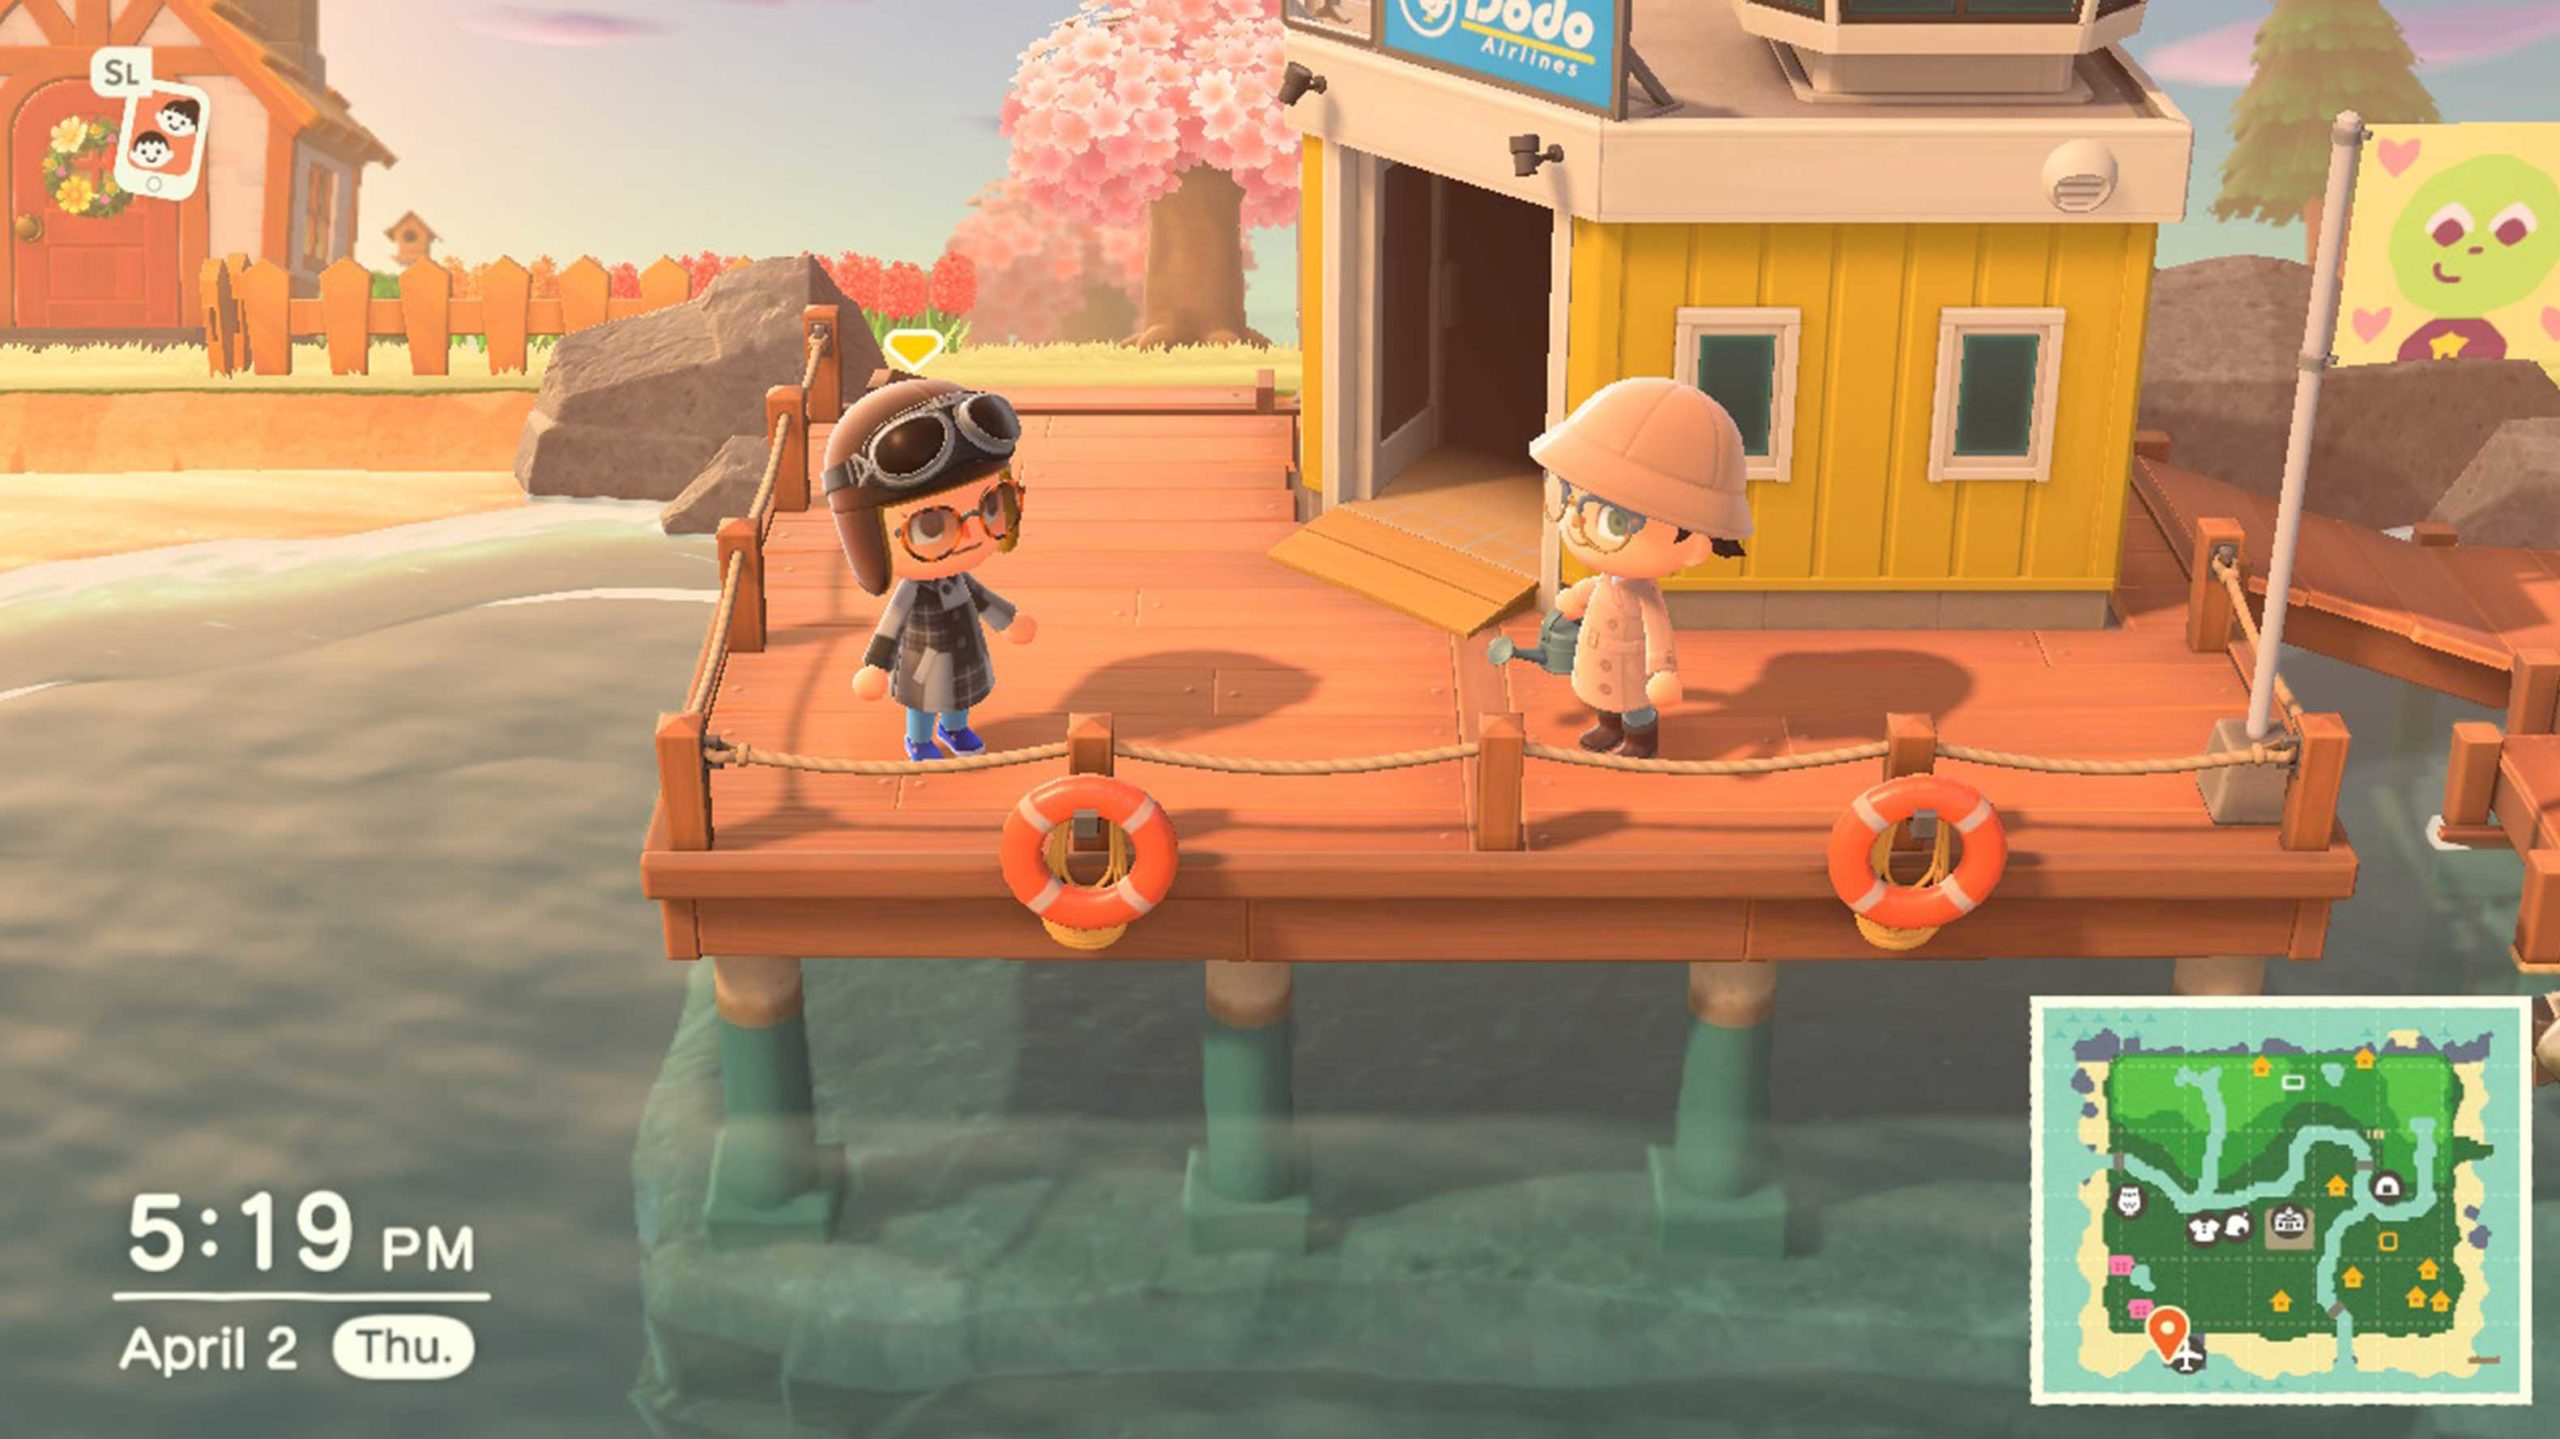 animal crossing local multiplayer switch